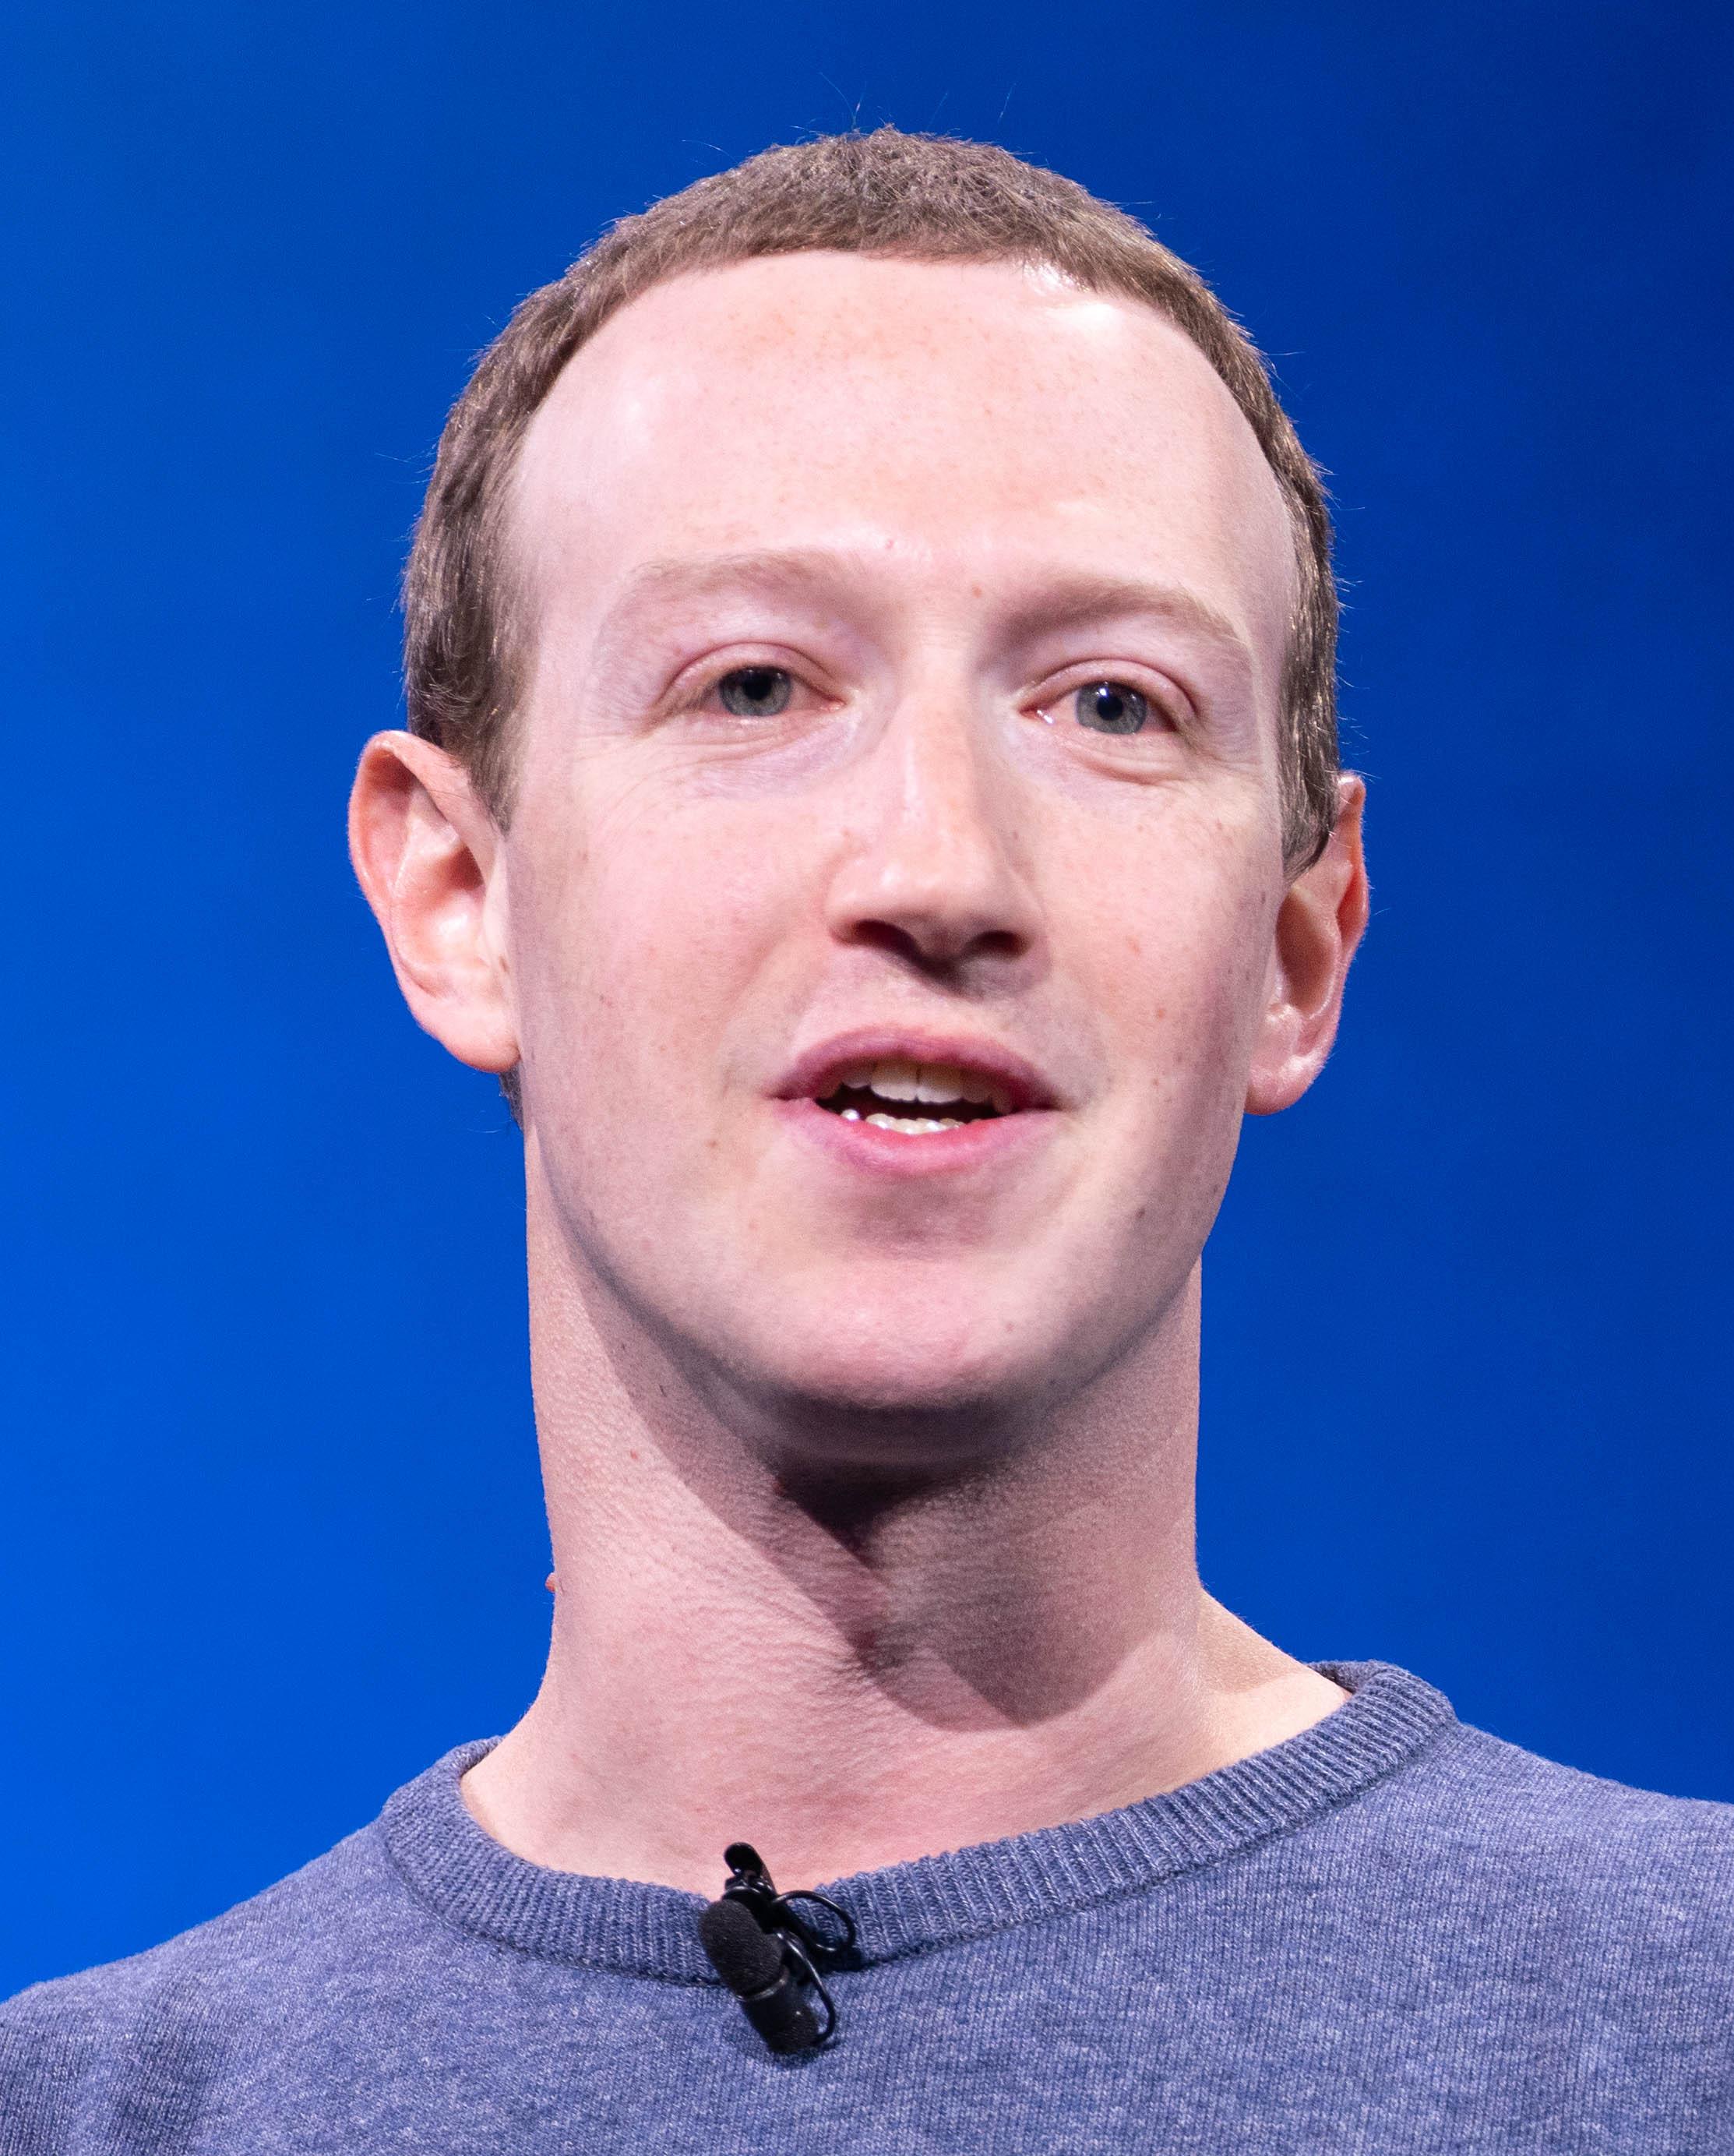 Mark Zuckerberg’s evolving style: a reflection of maturity or a calculated image shift